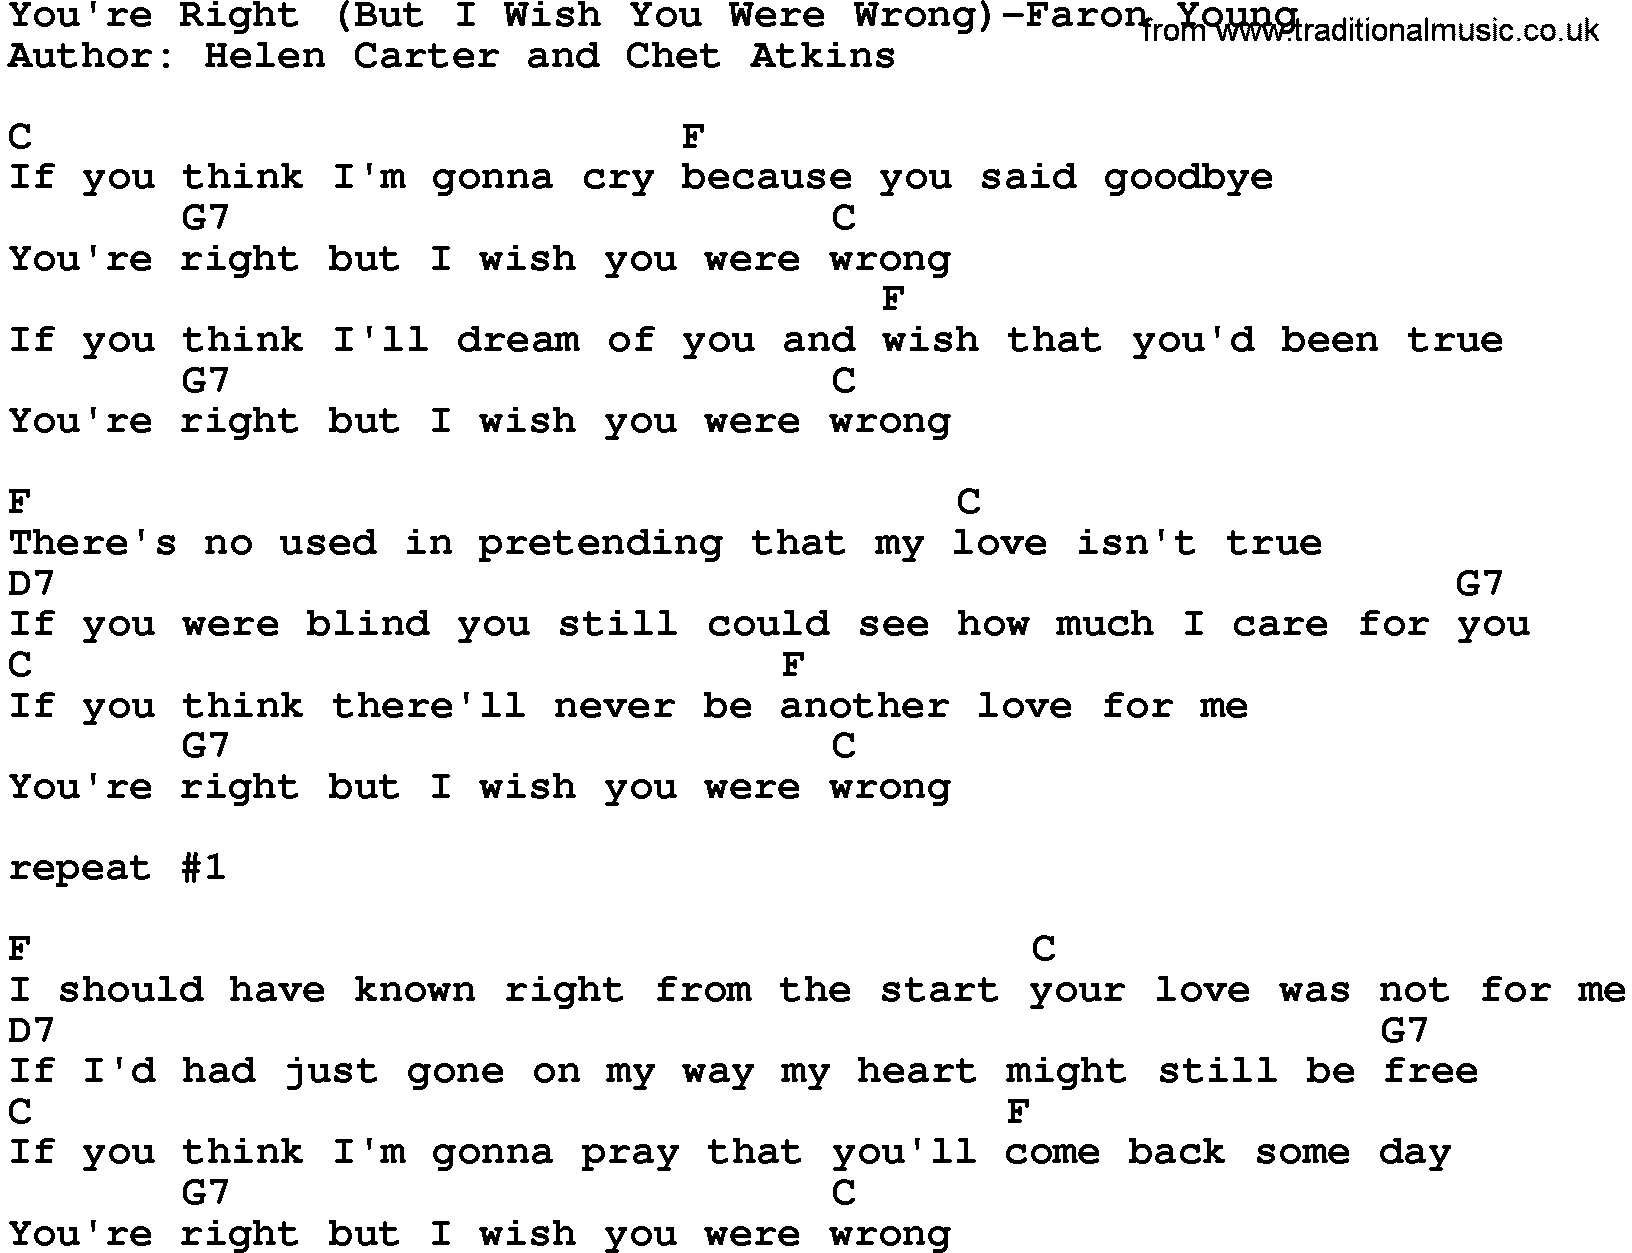 Country music song: You're Right(But I Wish You Were Wrong)-Faron Young lyrics and chords